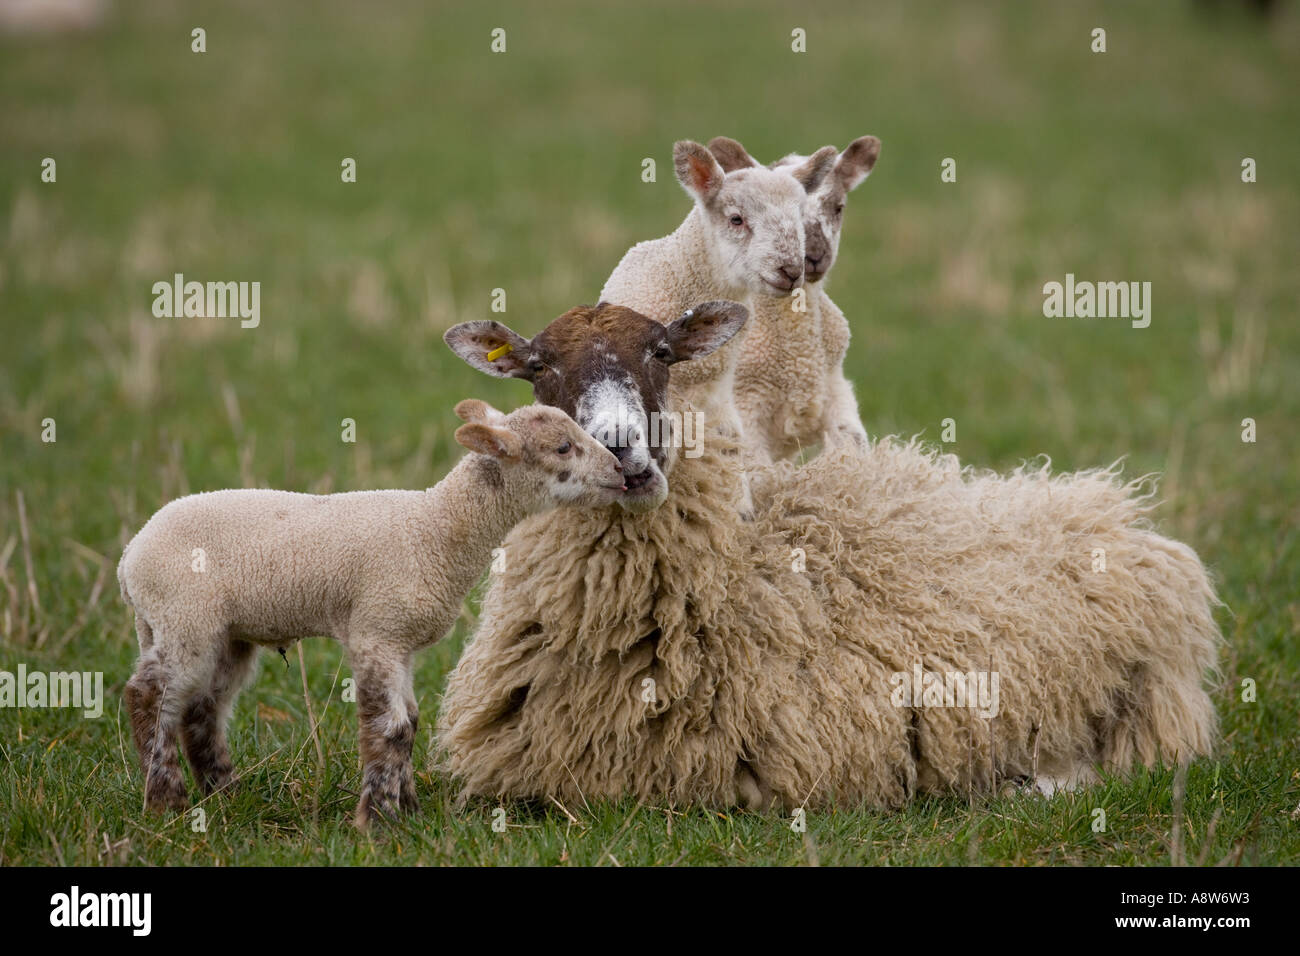 Lambs jumping on resting ewe in spring Stock Photo